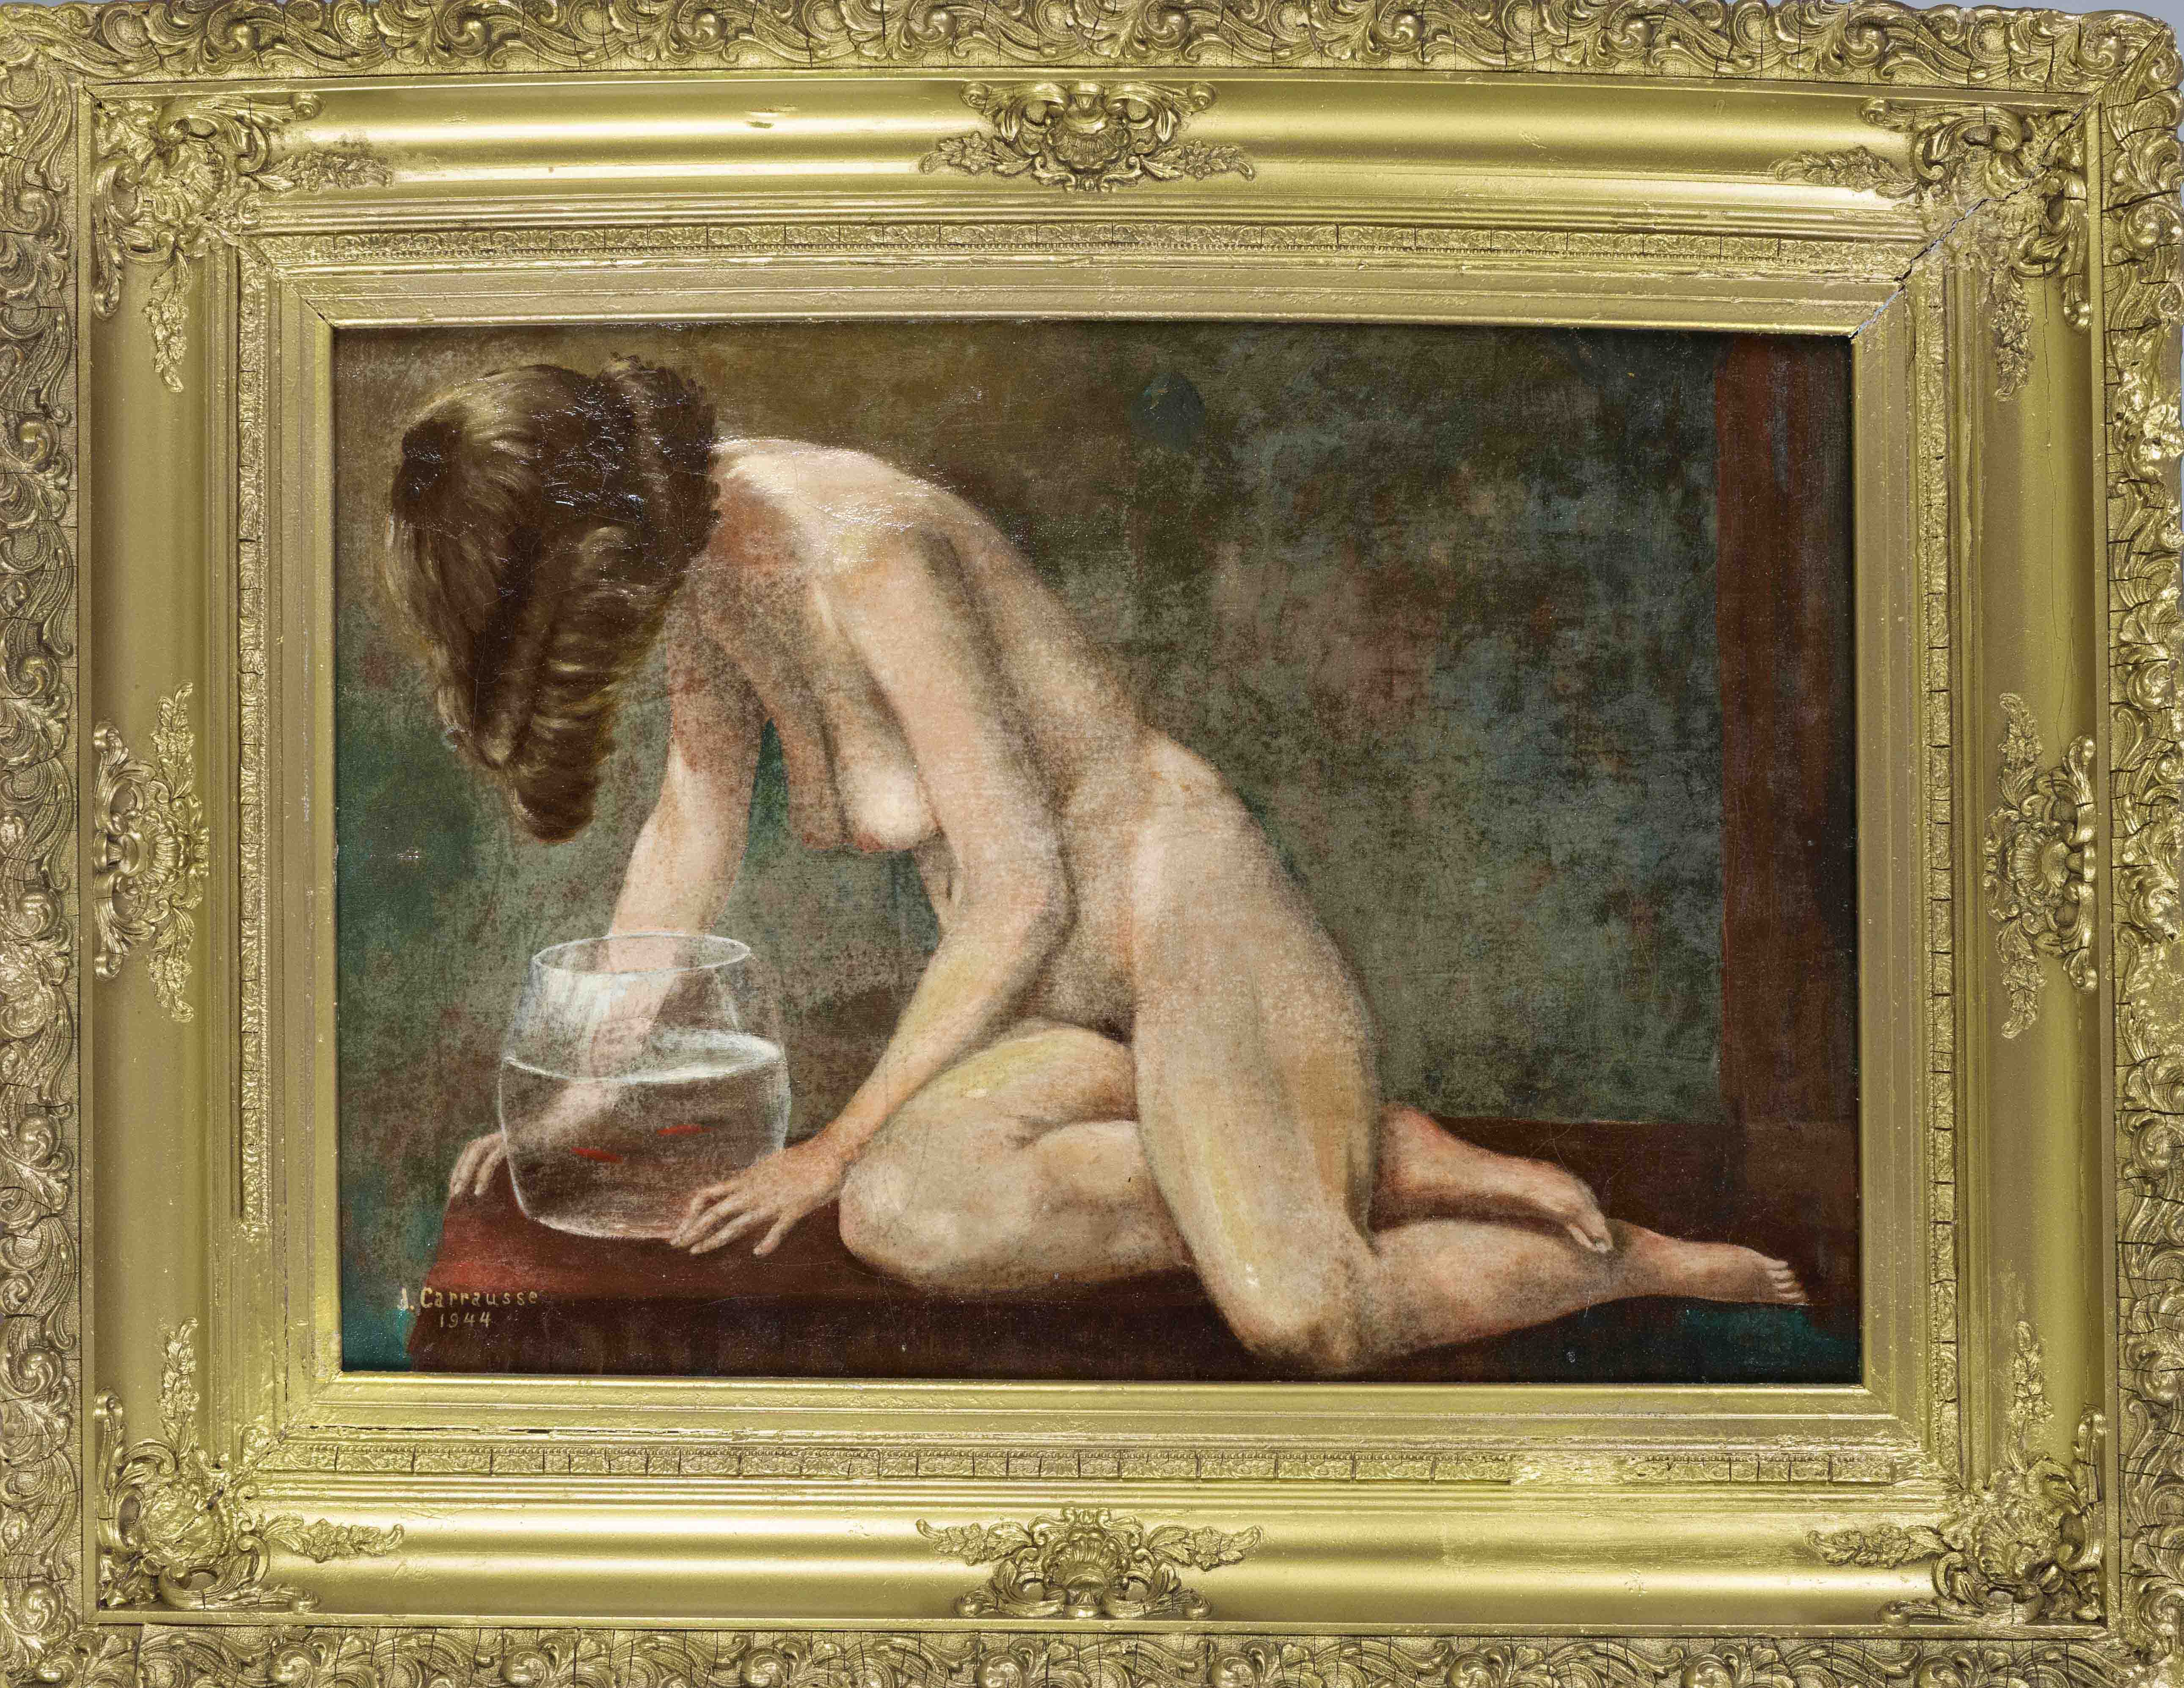 signed Carrausse, French painter c. 1900, female nude with goldfish bowl, oil on canvas, signed